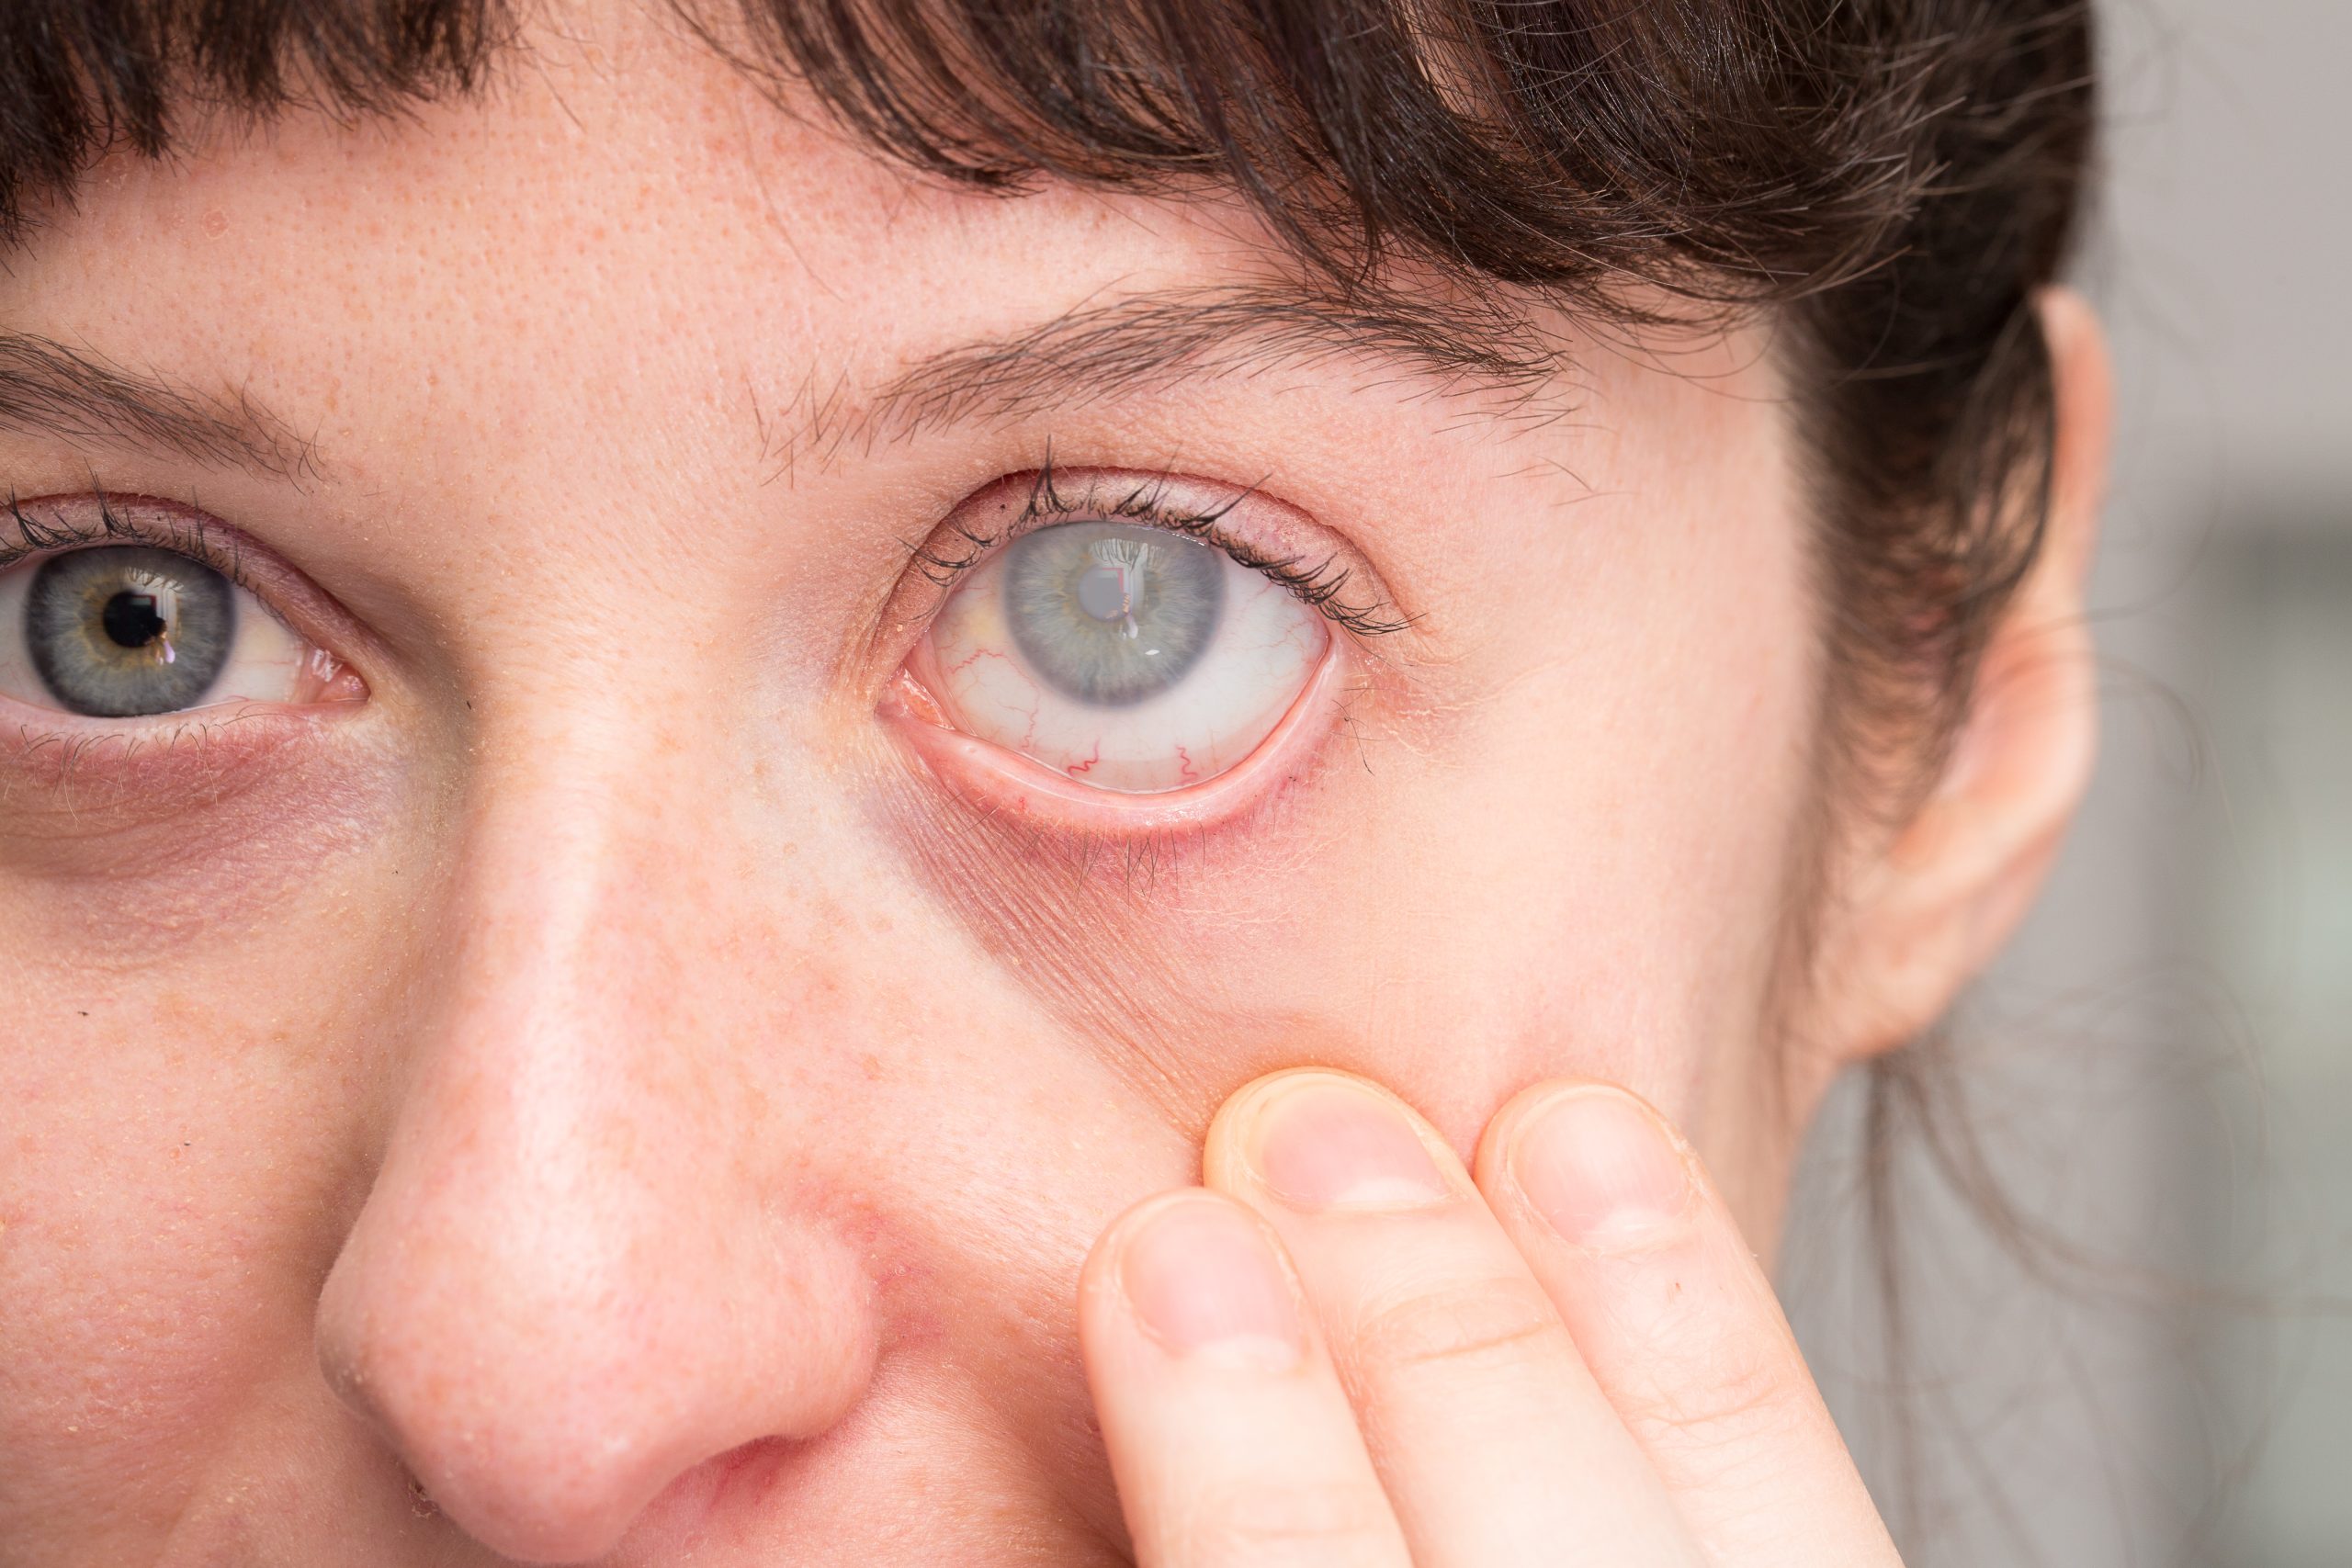 Corneal Ulcer Causes, Symptoms, and Treatment Options